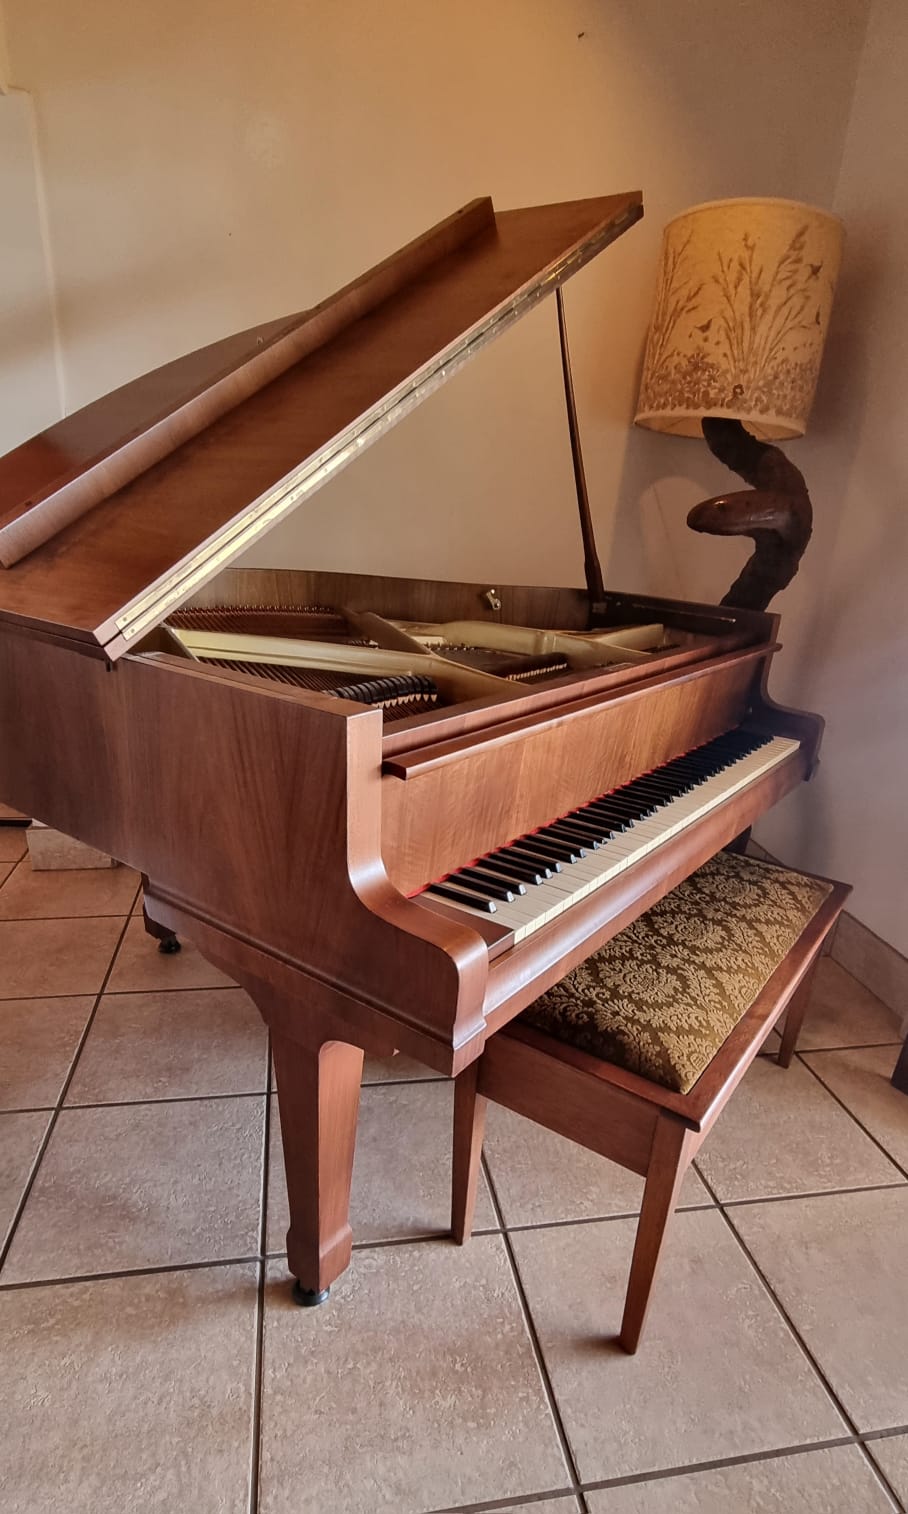 ROSLER BABY GRAND PIANO (FULLY REFURBISHED) - SECOND HAND